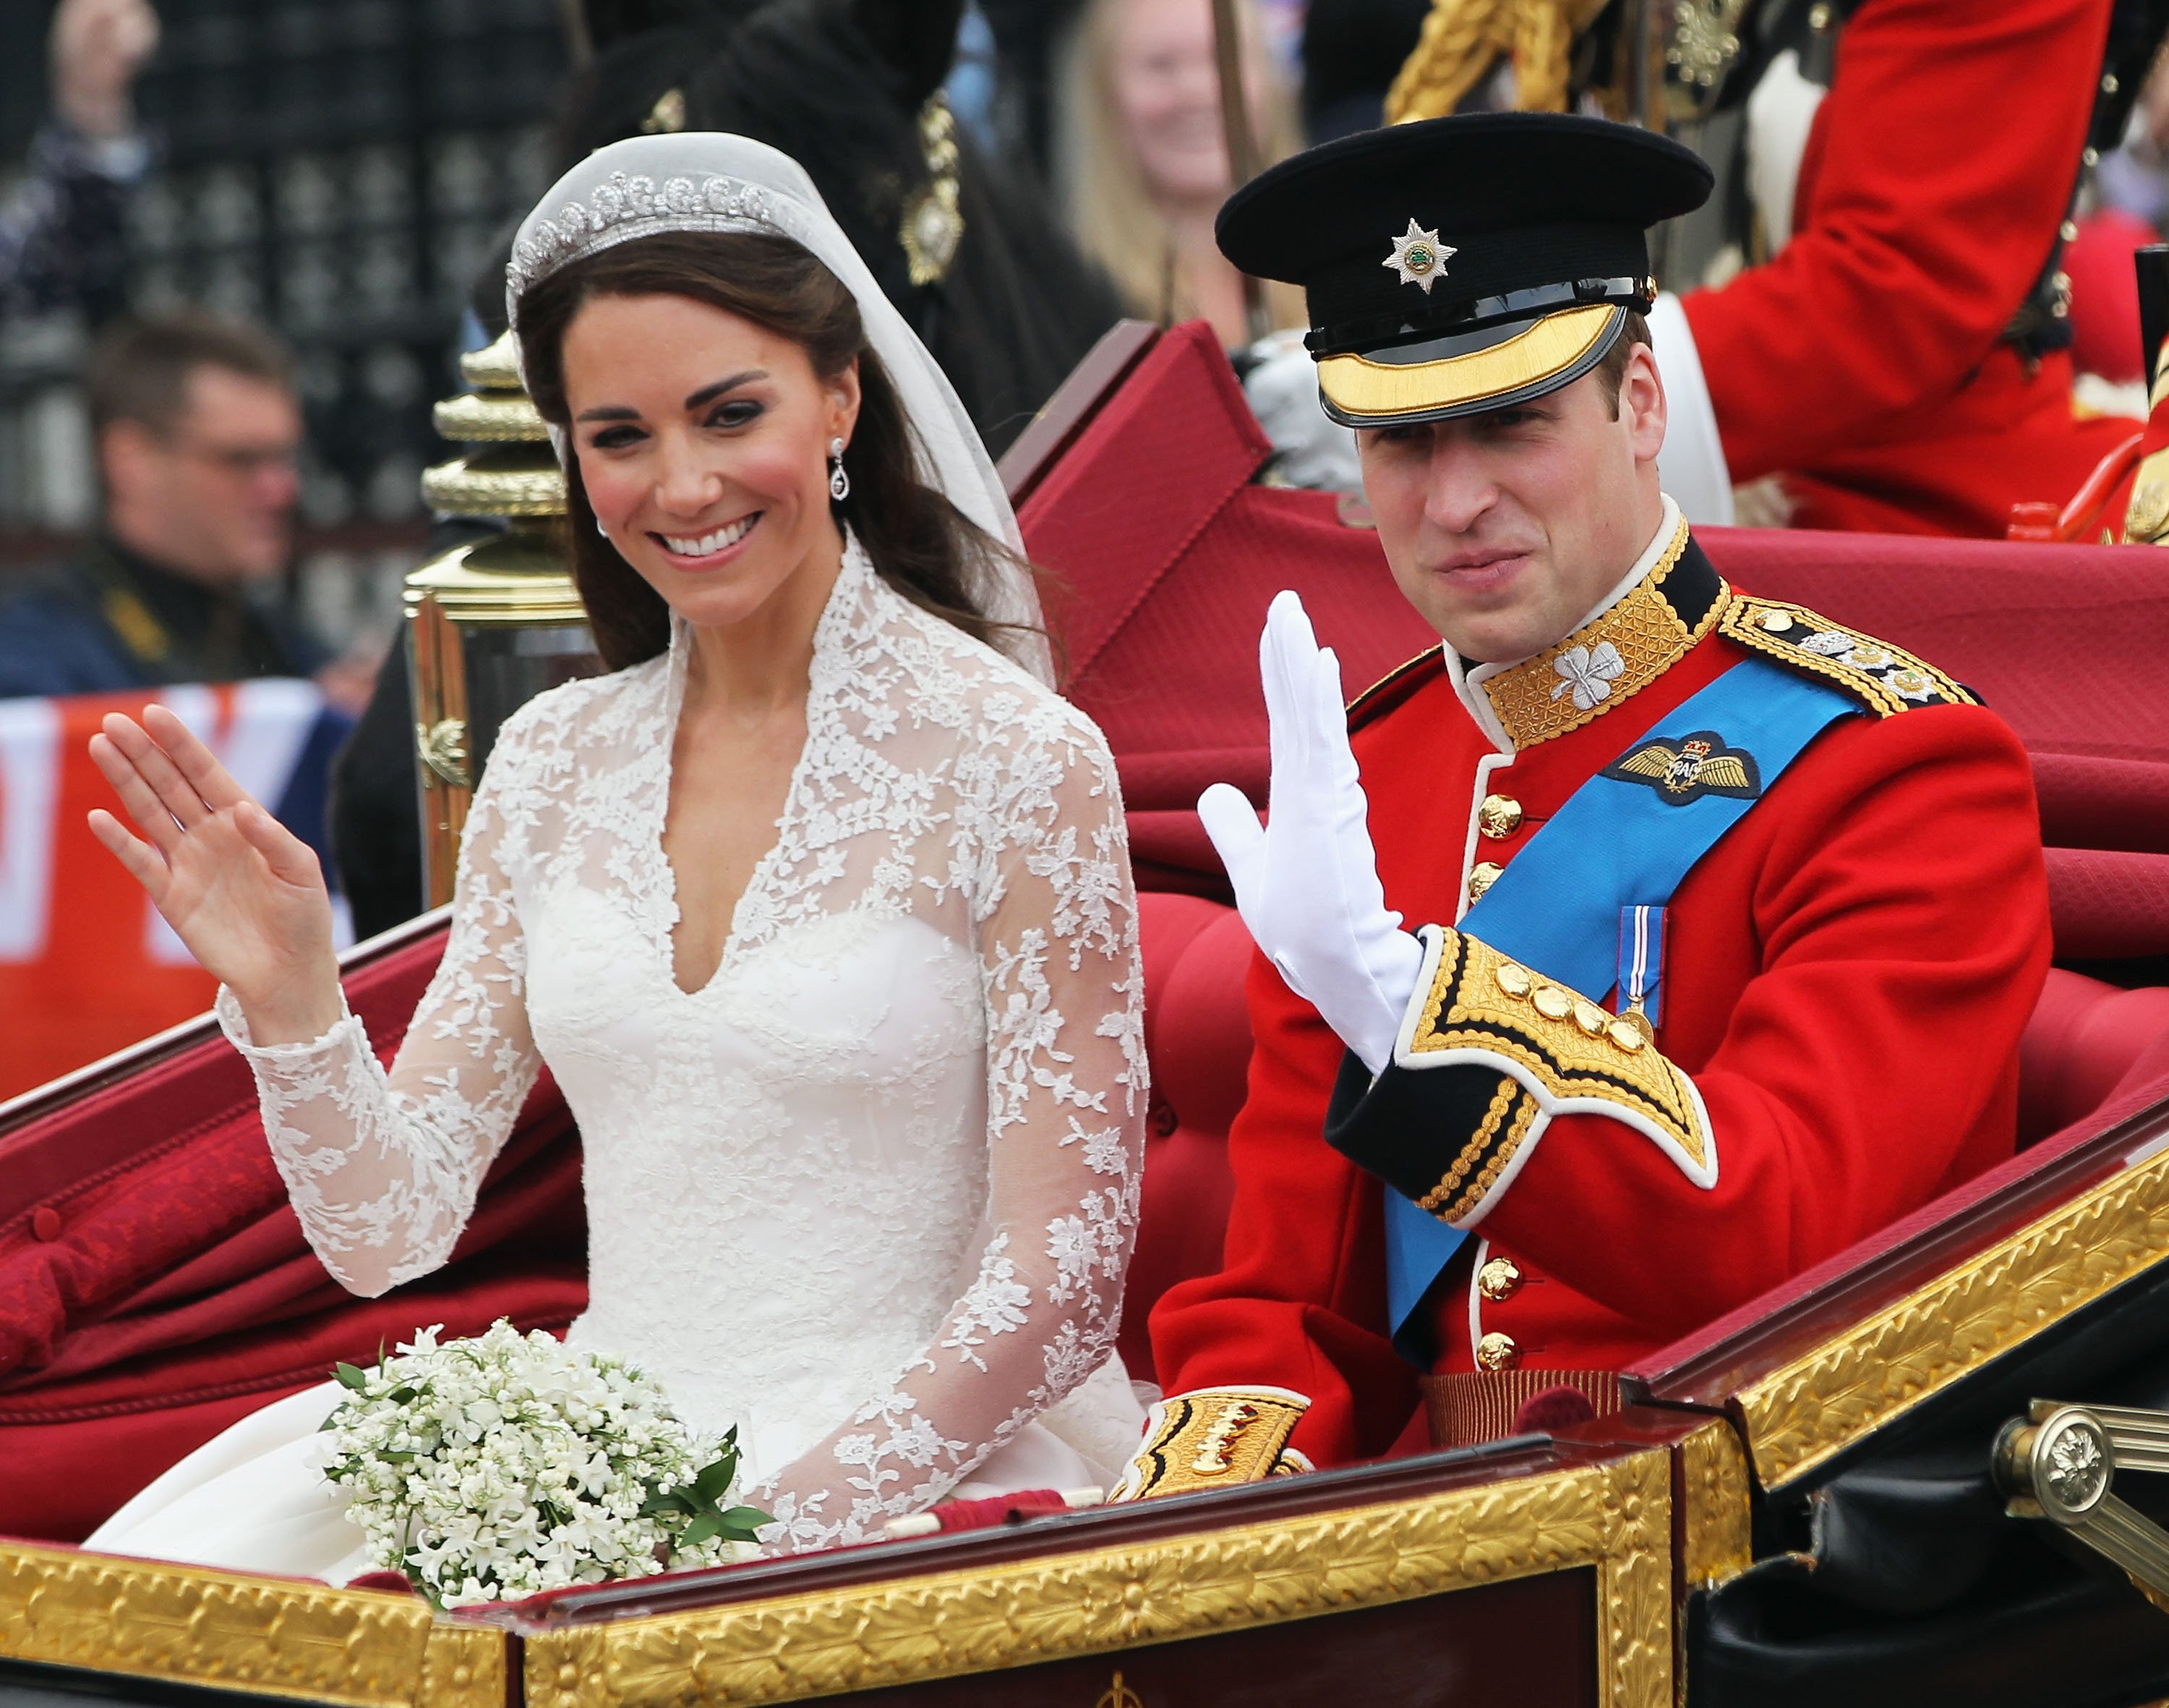 Kate Middleton and Prince William pictured on their wedding day, traveling in a carriage following the ceremony at Westminster Abbey. 2011, London, England. | Photo Getty Images